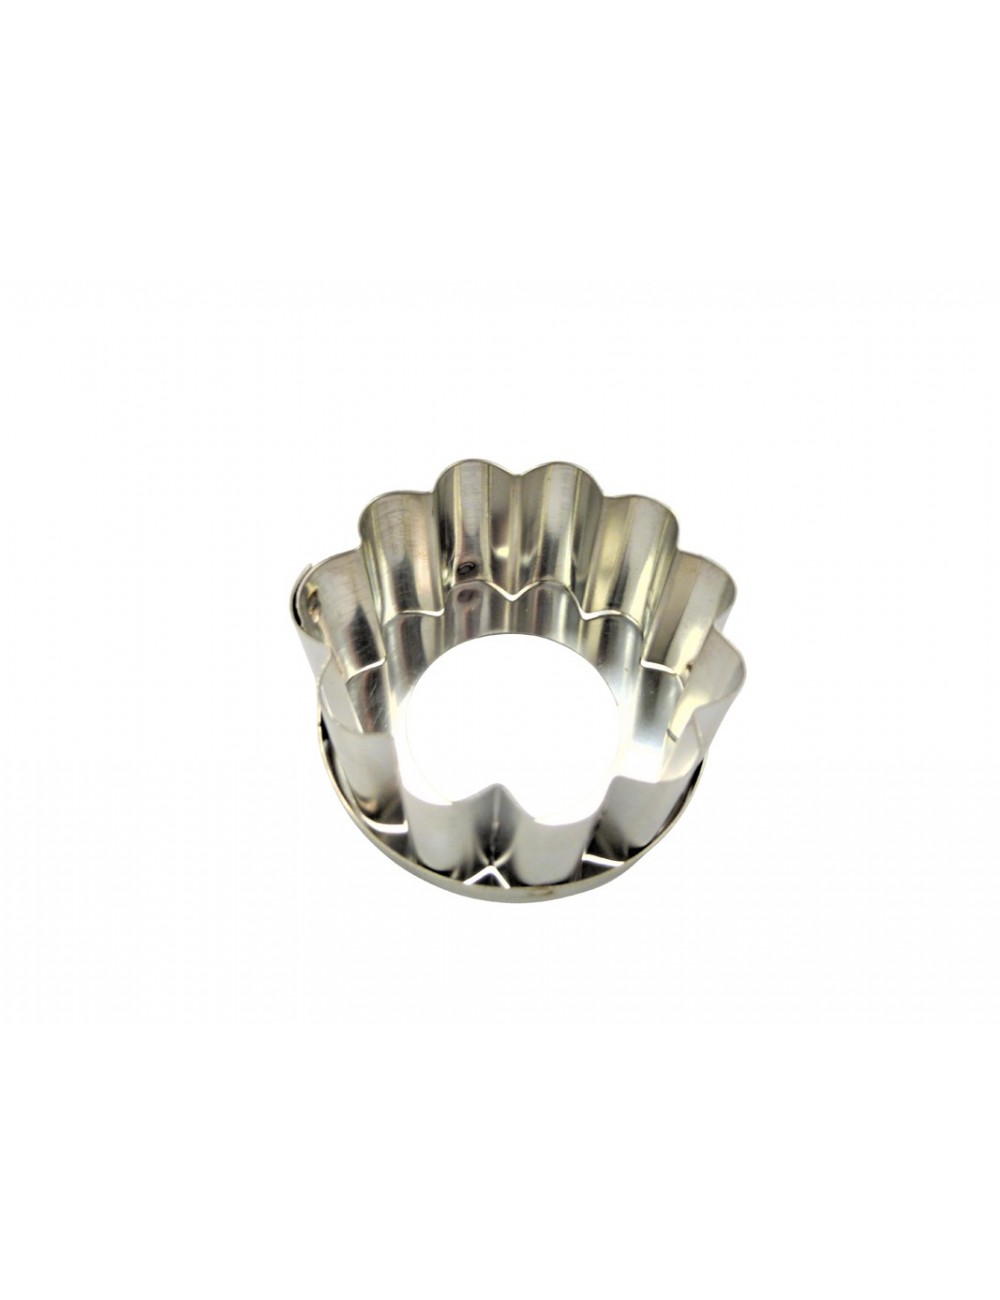 STAINLESS STEEL CUTTER - DAISY-SHAPED